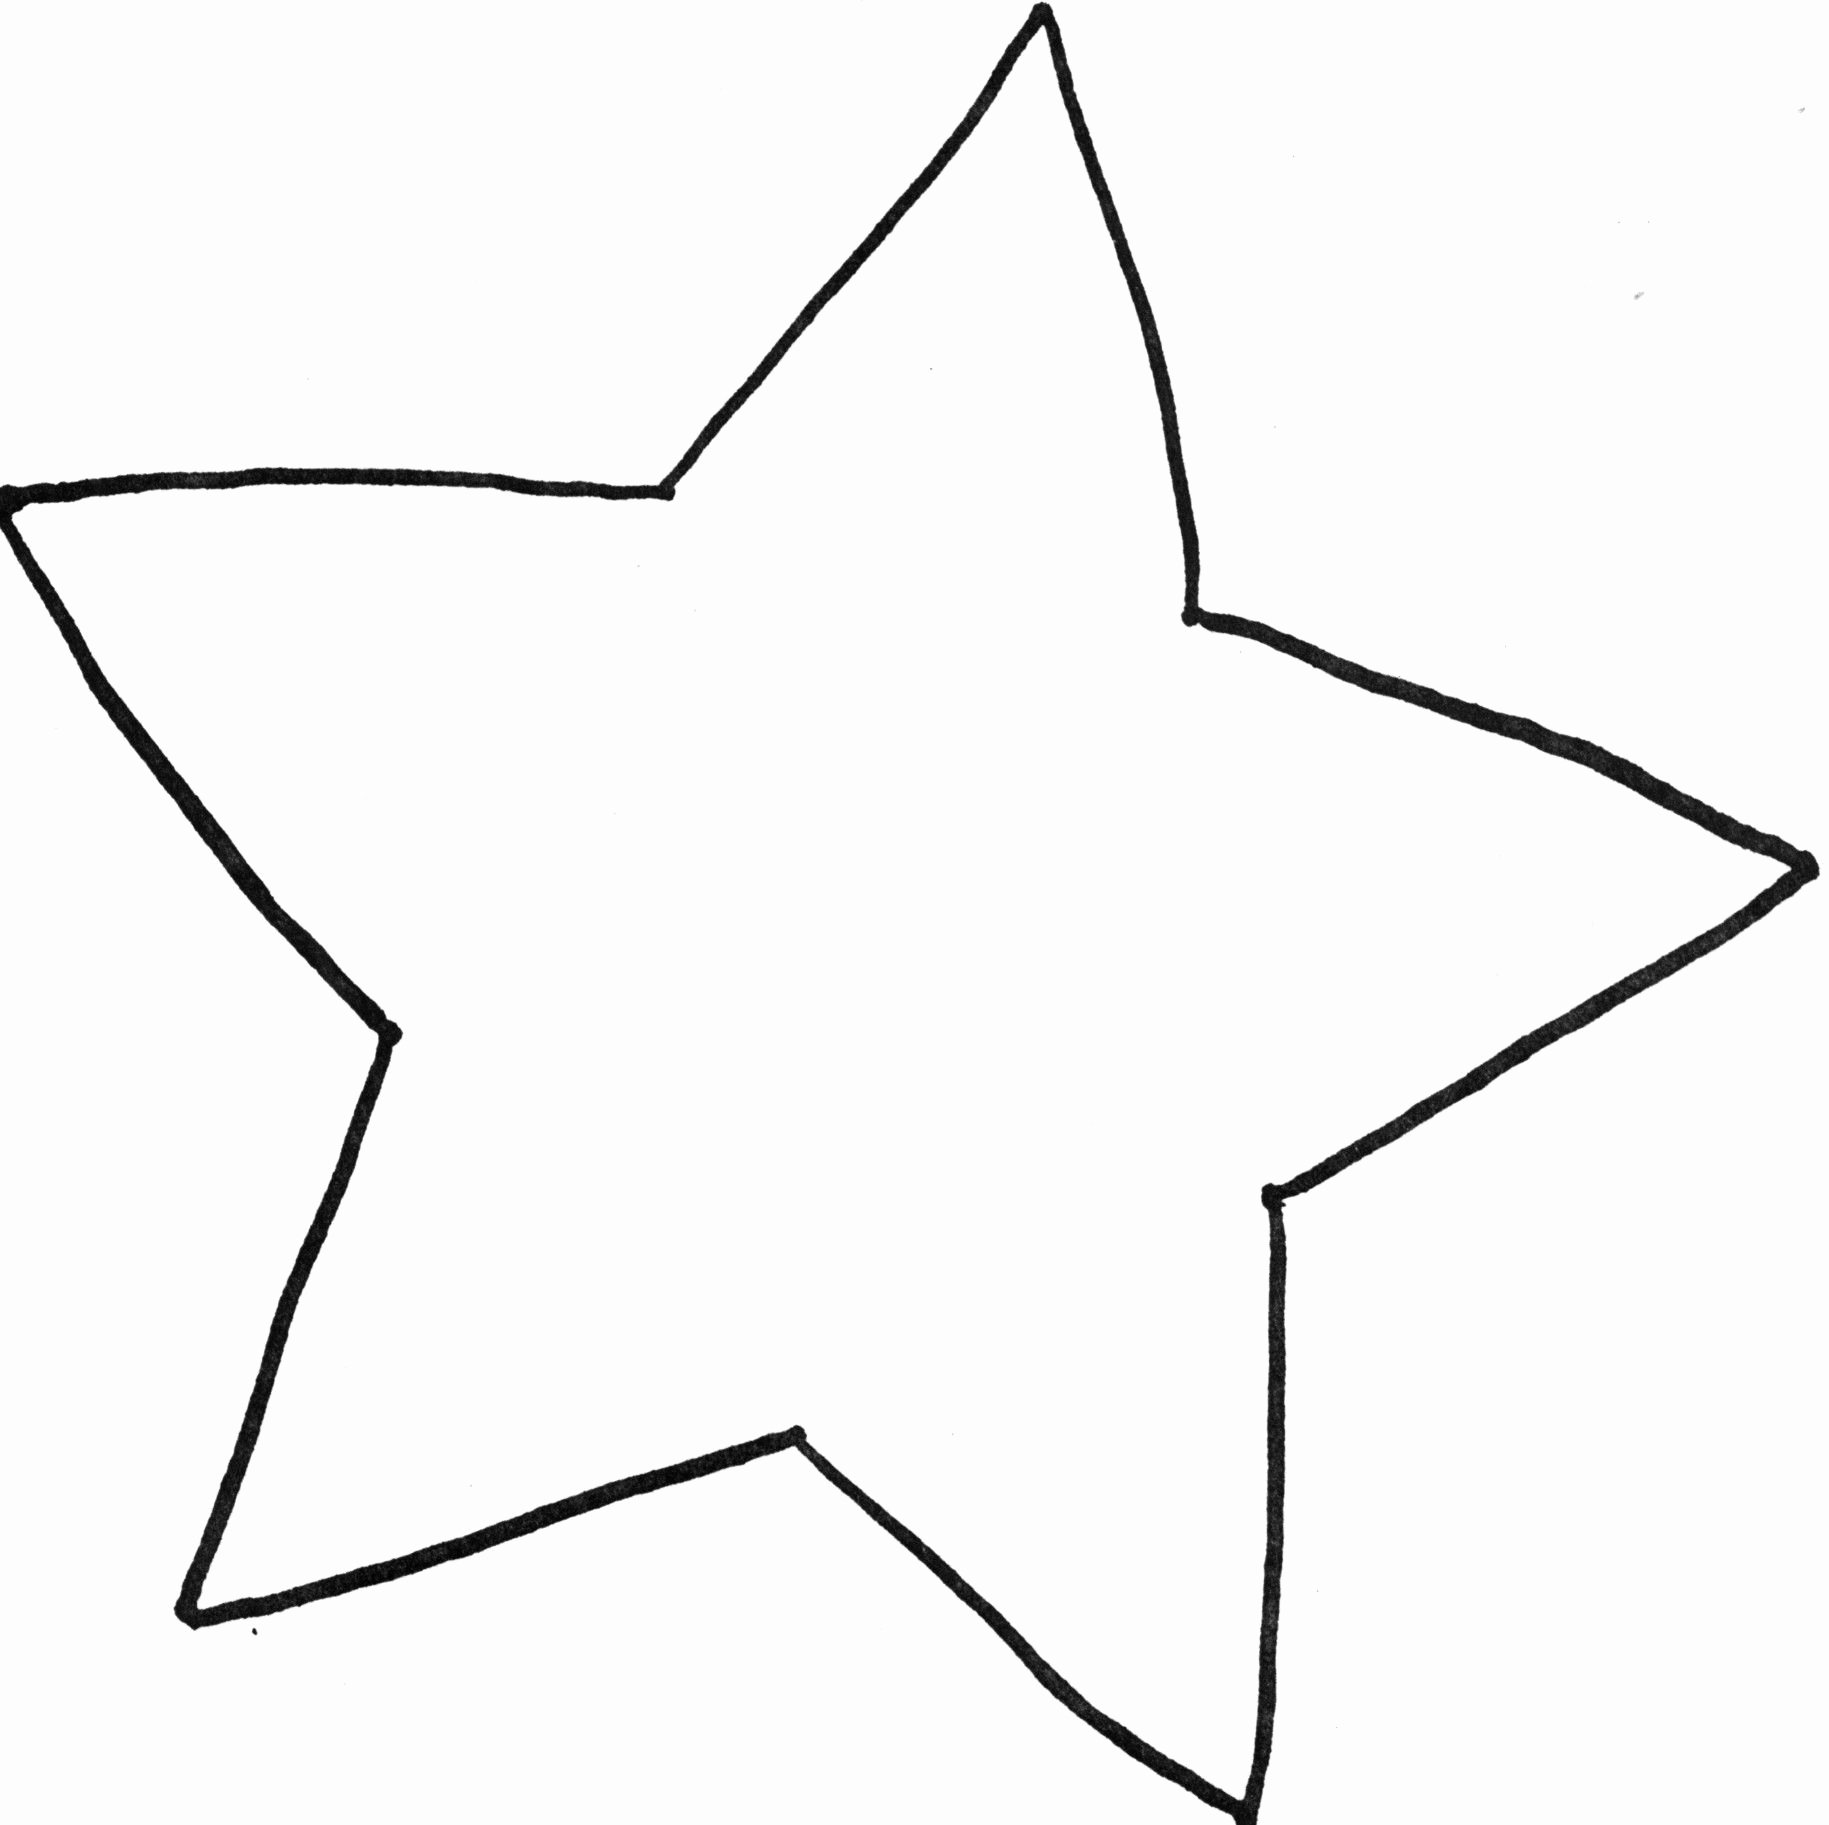 1 inch star template awesome star template of 1 inch star template